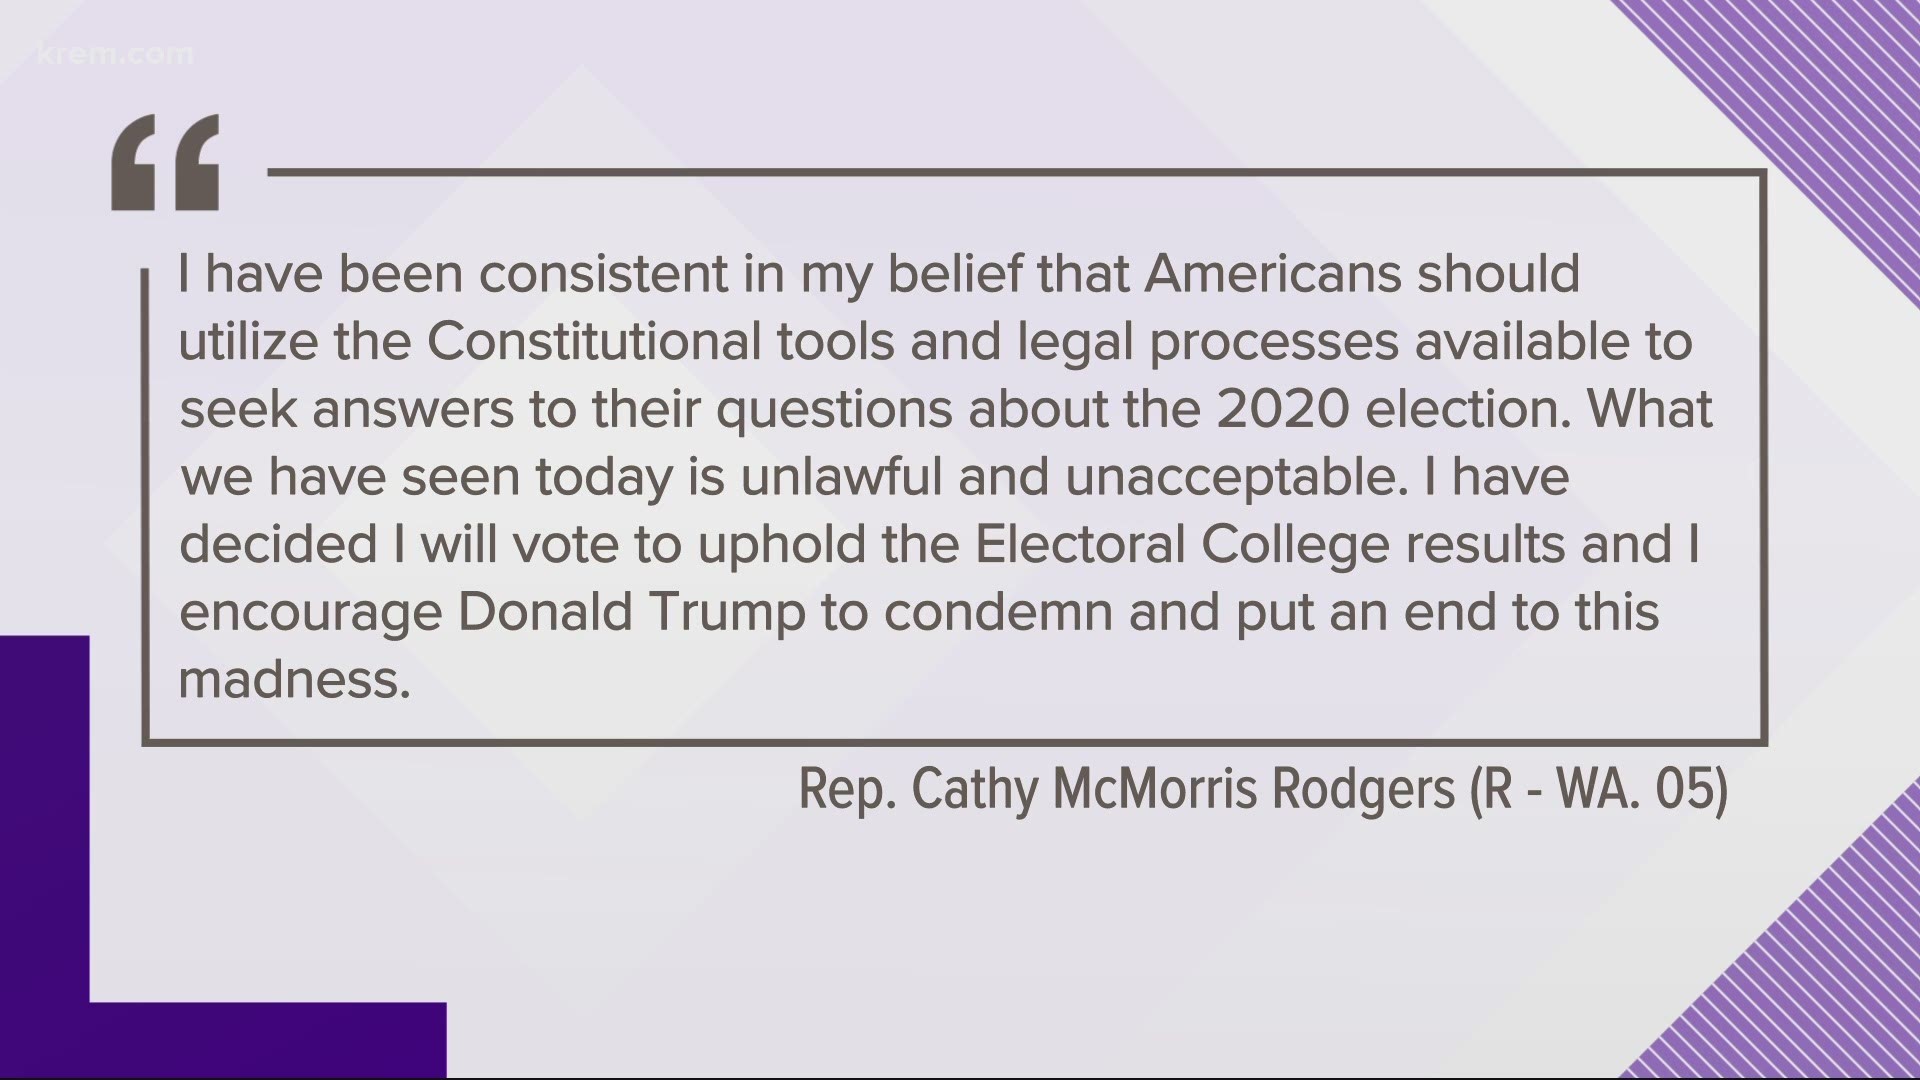 Representative Cathy McMorris Rodgers changed course after violent mobs entered the U.S. Capitol and will now no longer object to the Electoral College results.